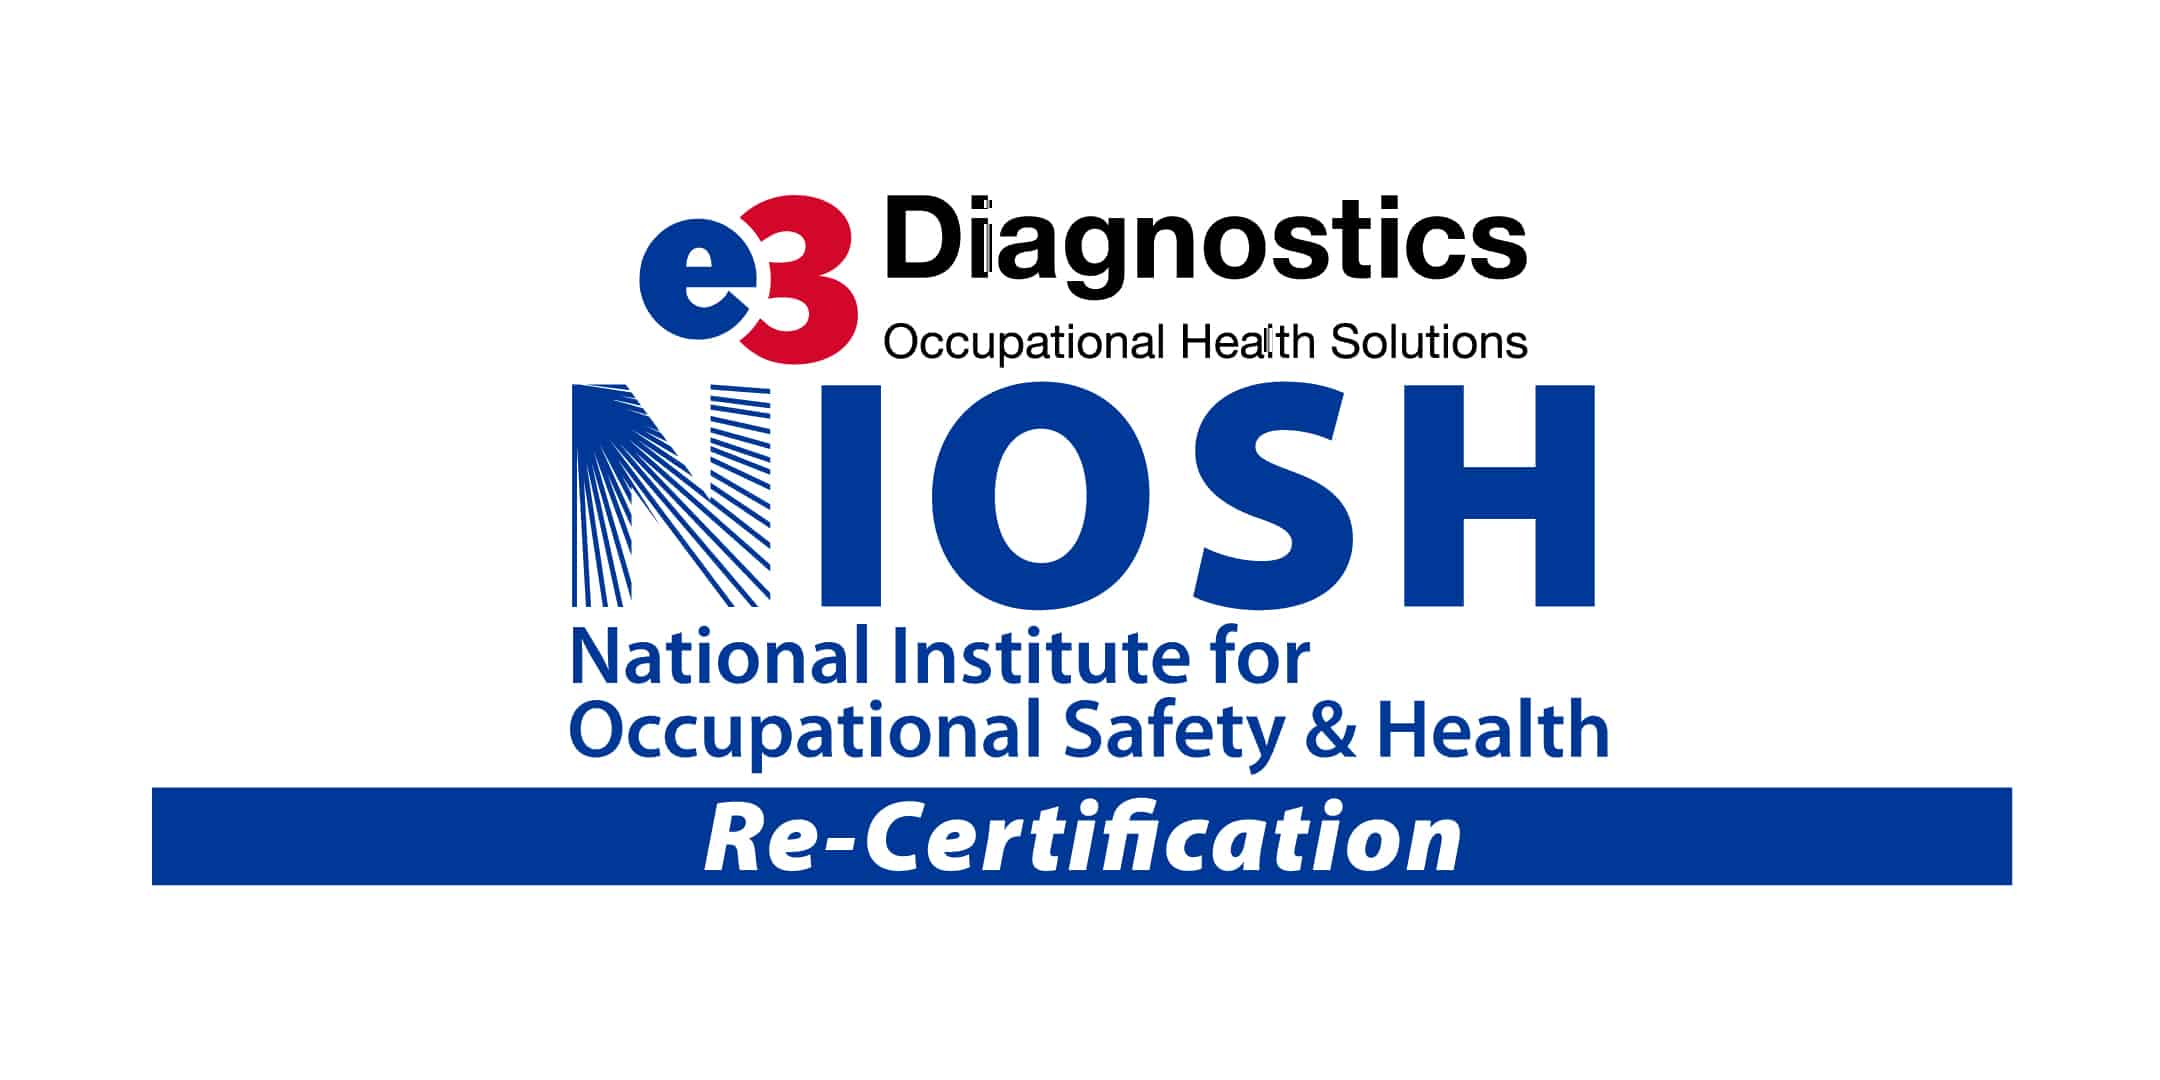 Niosh Re-Certification With E3 Occupational 7